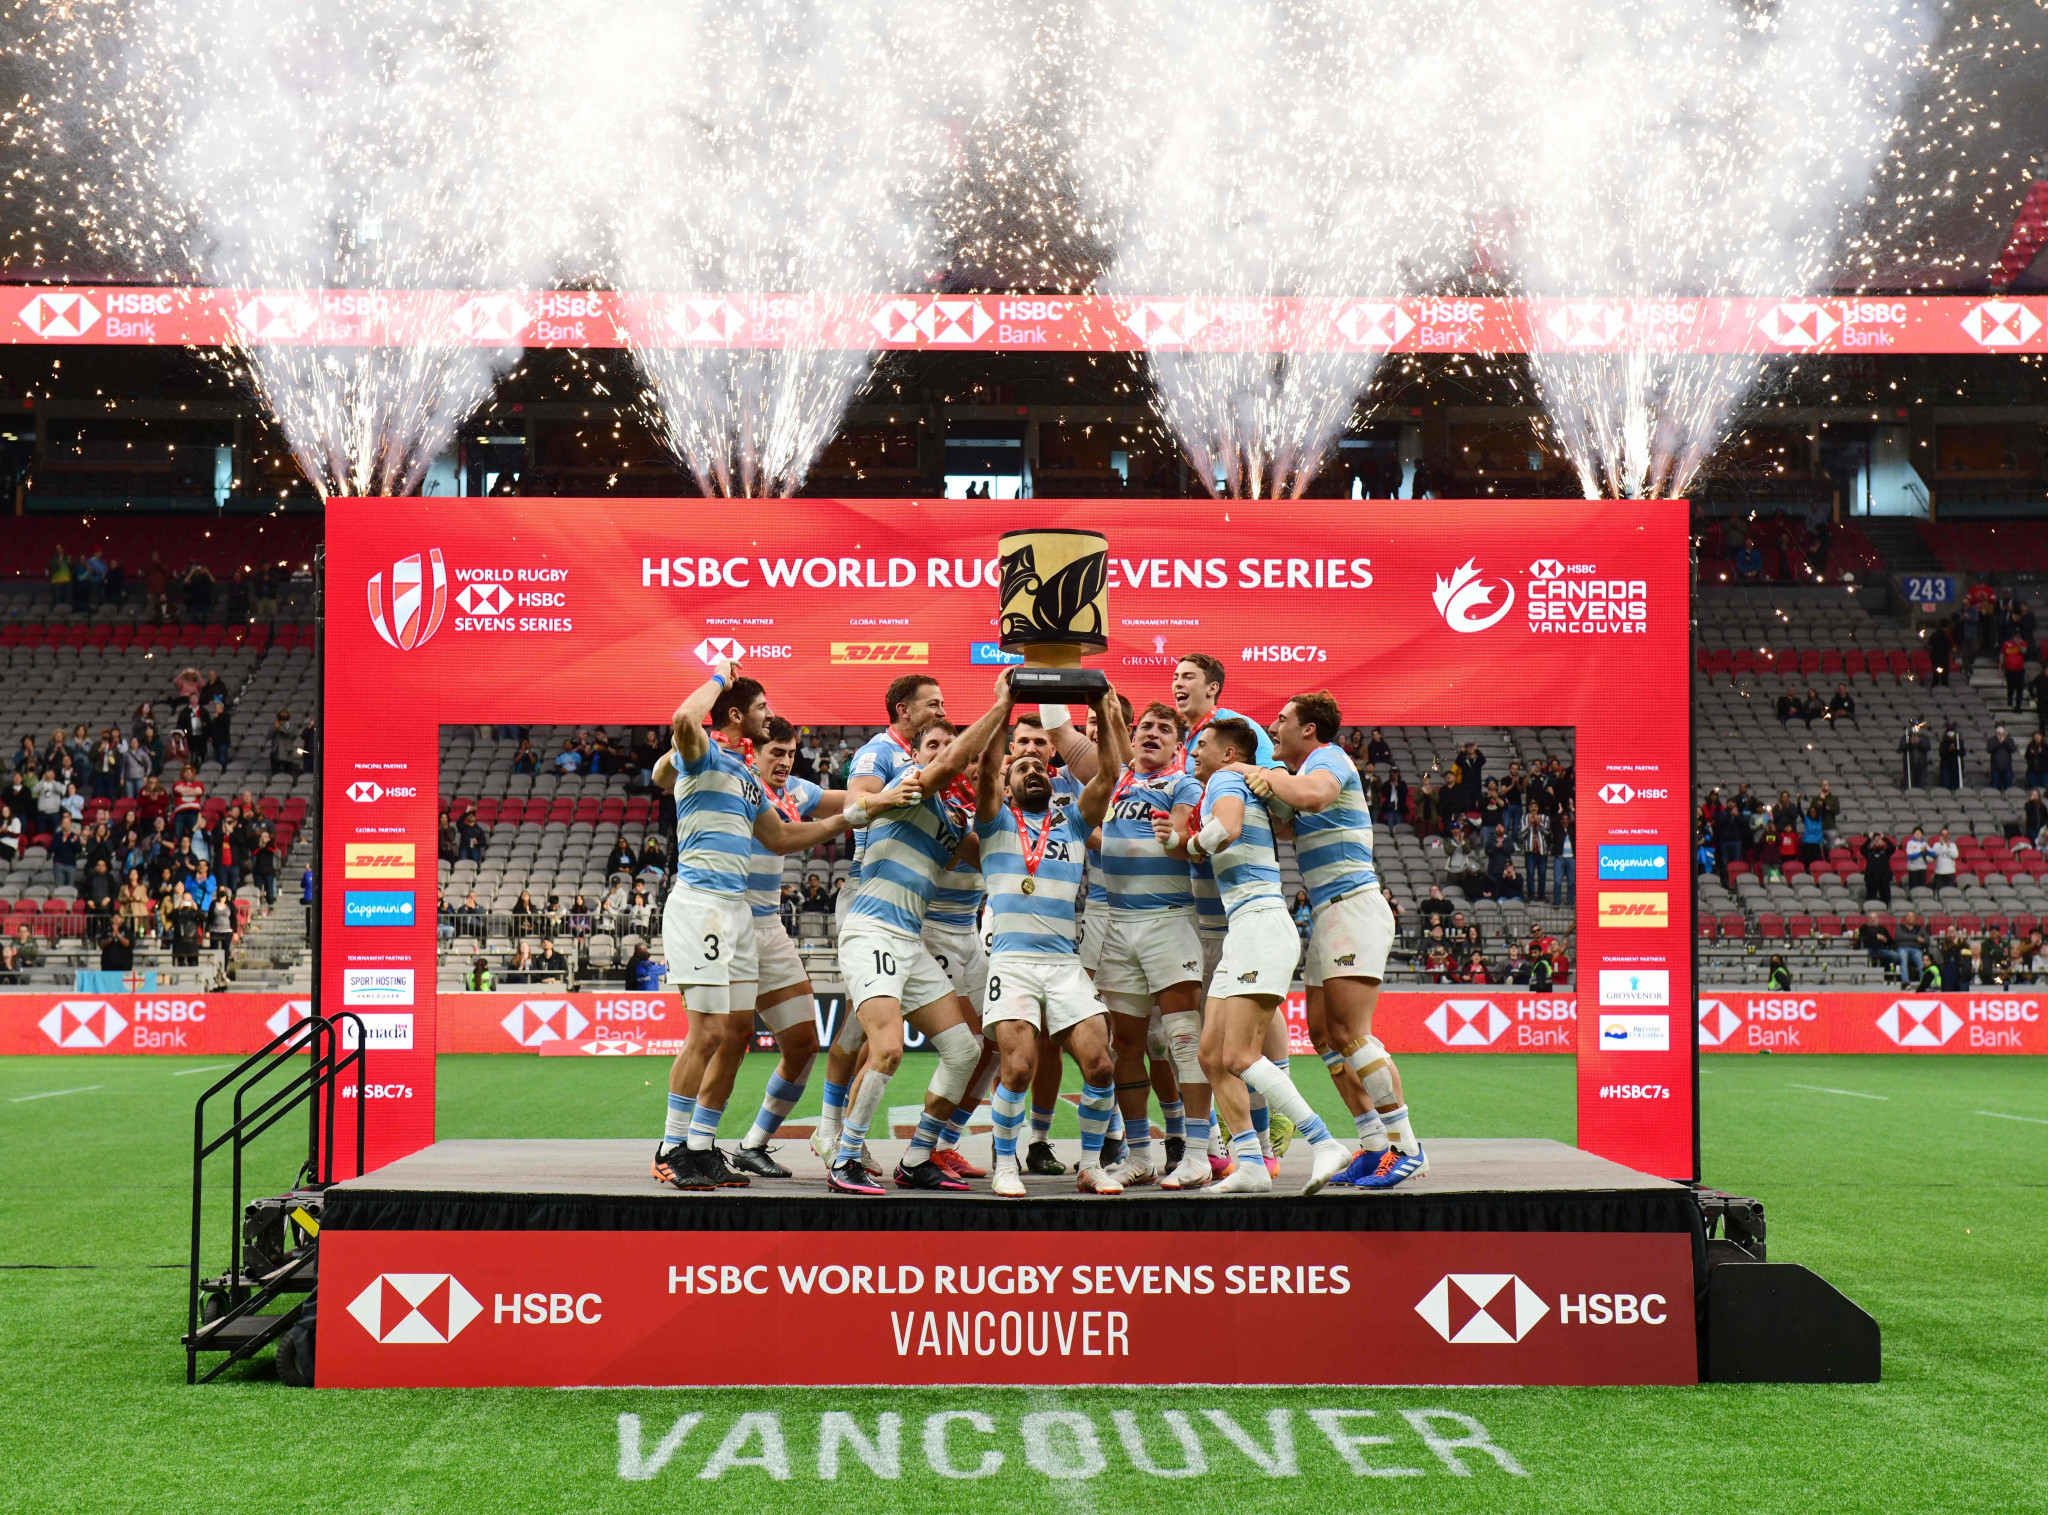 Argentina avenged an Olympic semi-final defeat to Fiji at Tokyo 2020 to win their first World Rugby Sevens Series event since 2009 ©Getty Images